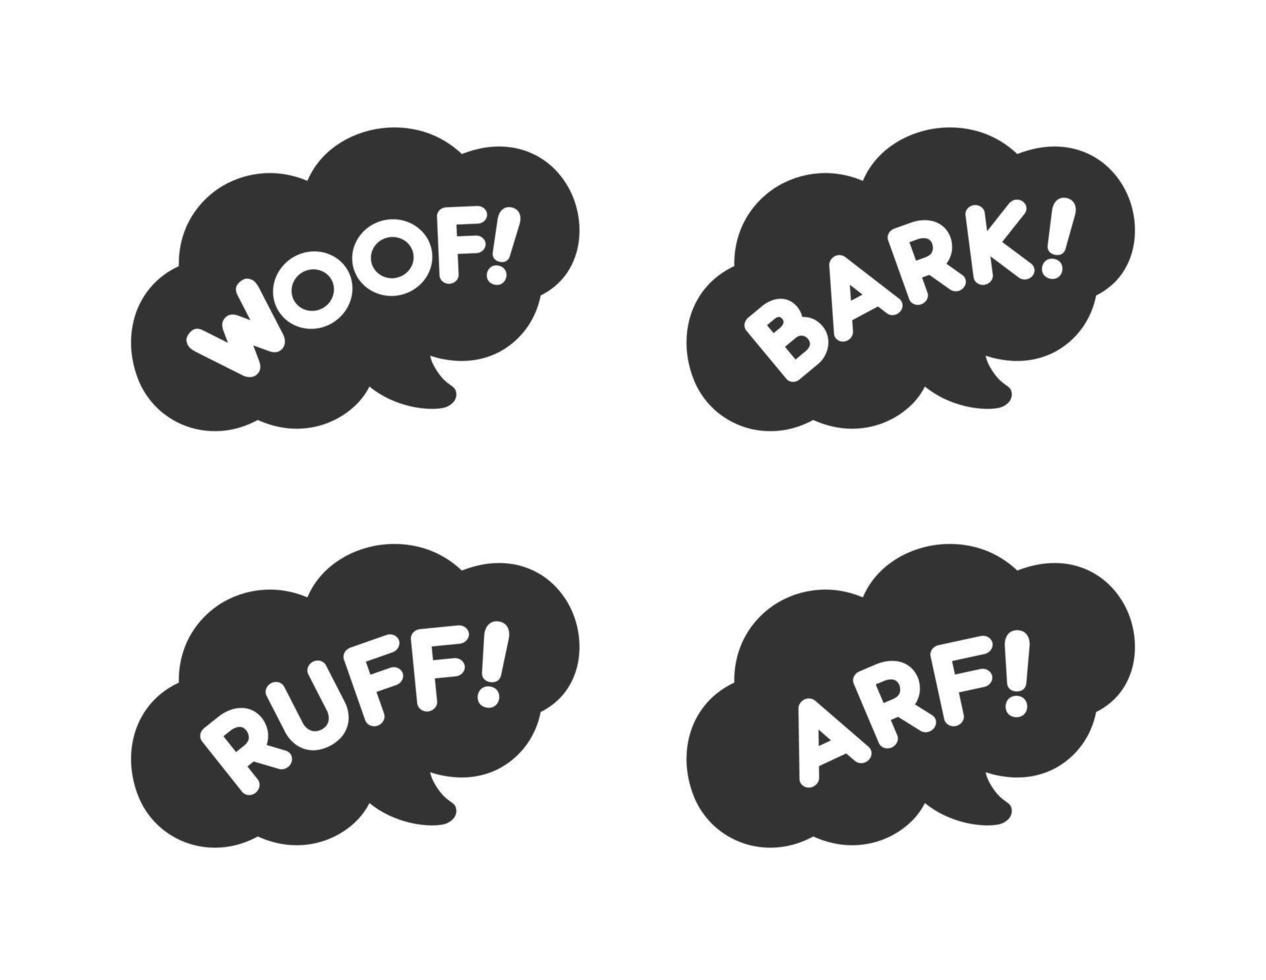 Cartoon comics dog bark sound effect and lettering set. White text in a dark black speech bubble balloon clip art. Simple flat vector illustration silhouette on white background.